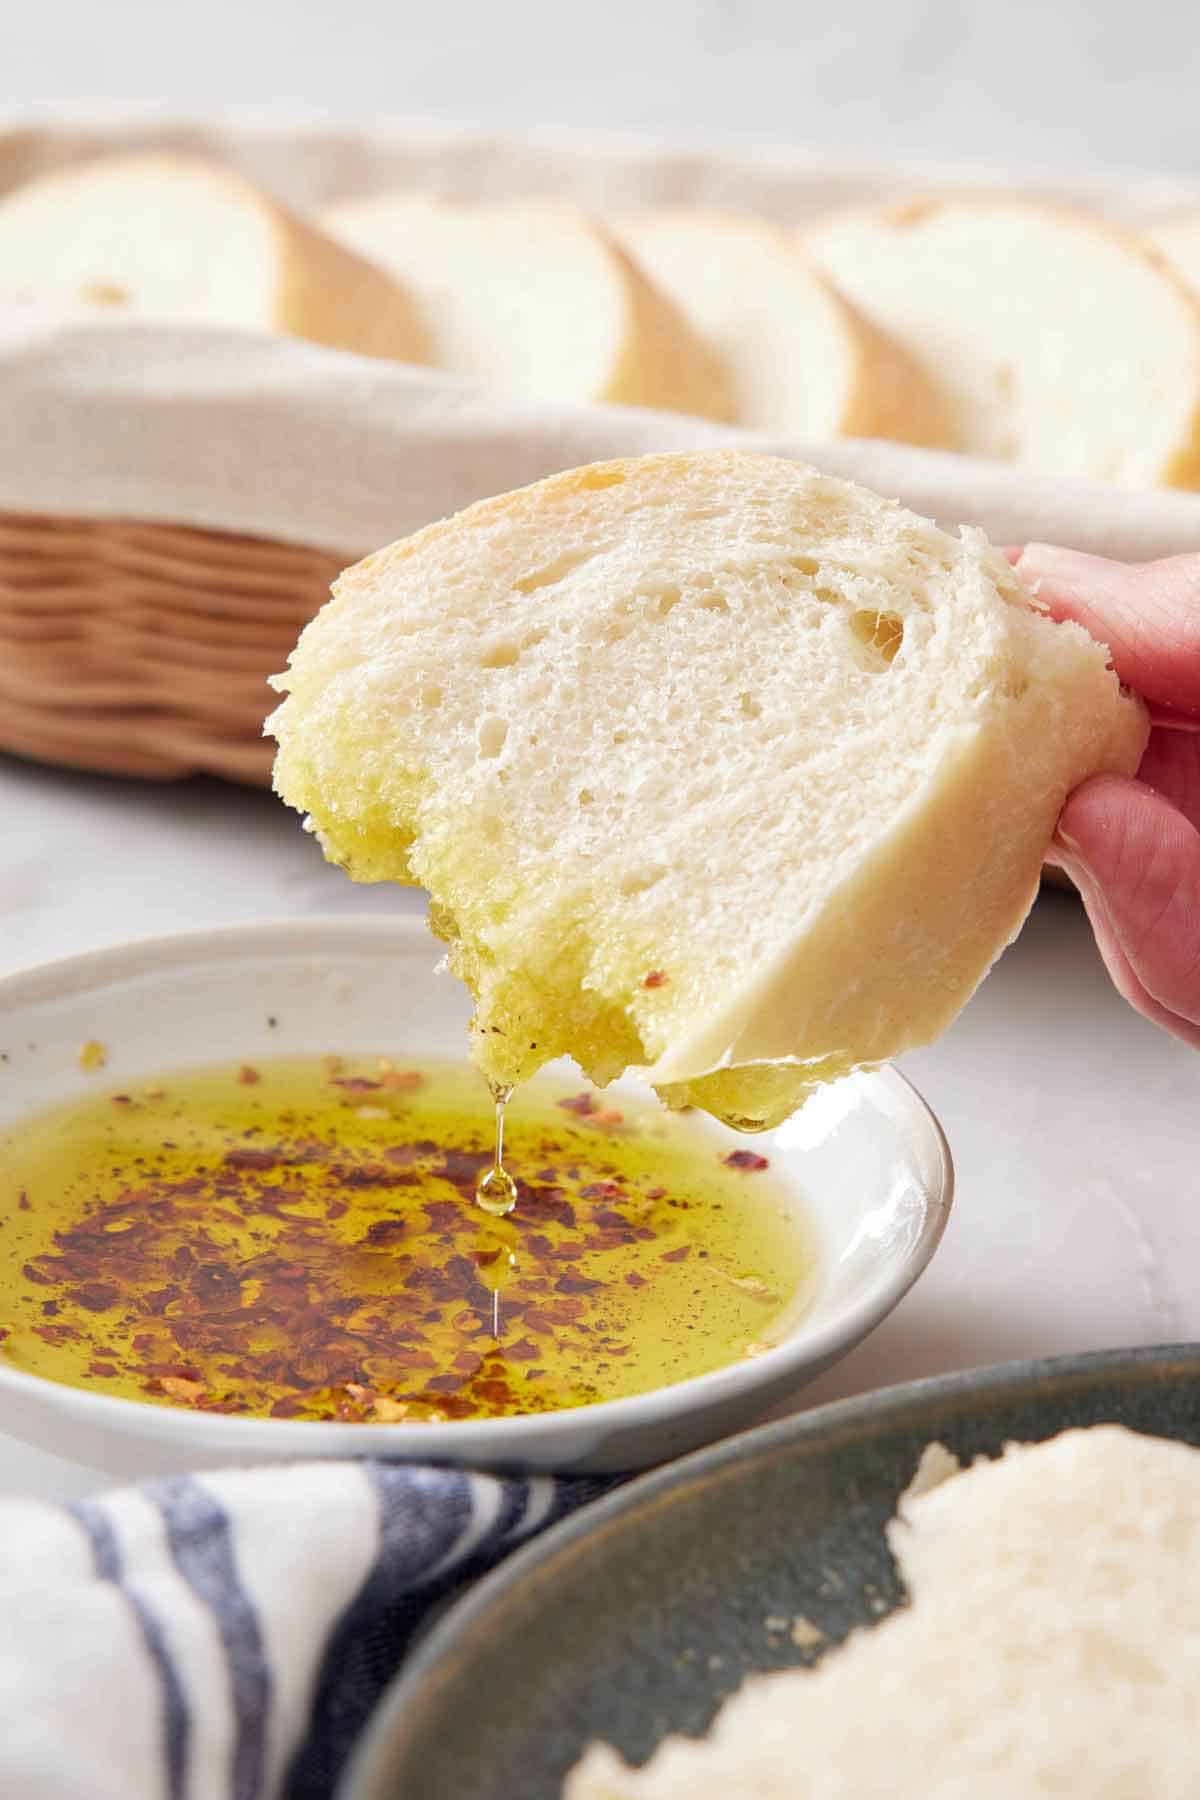 A piece of Italian bread dipped into oil with a basket with more bread in the background.